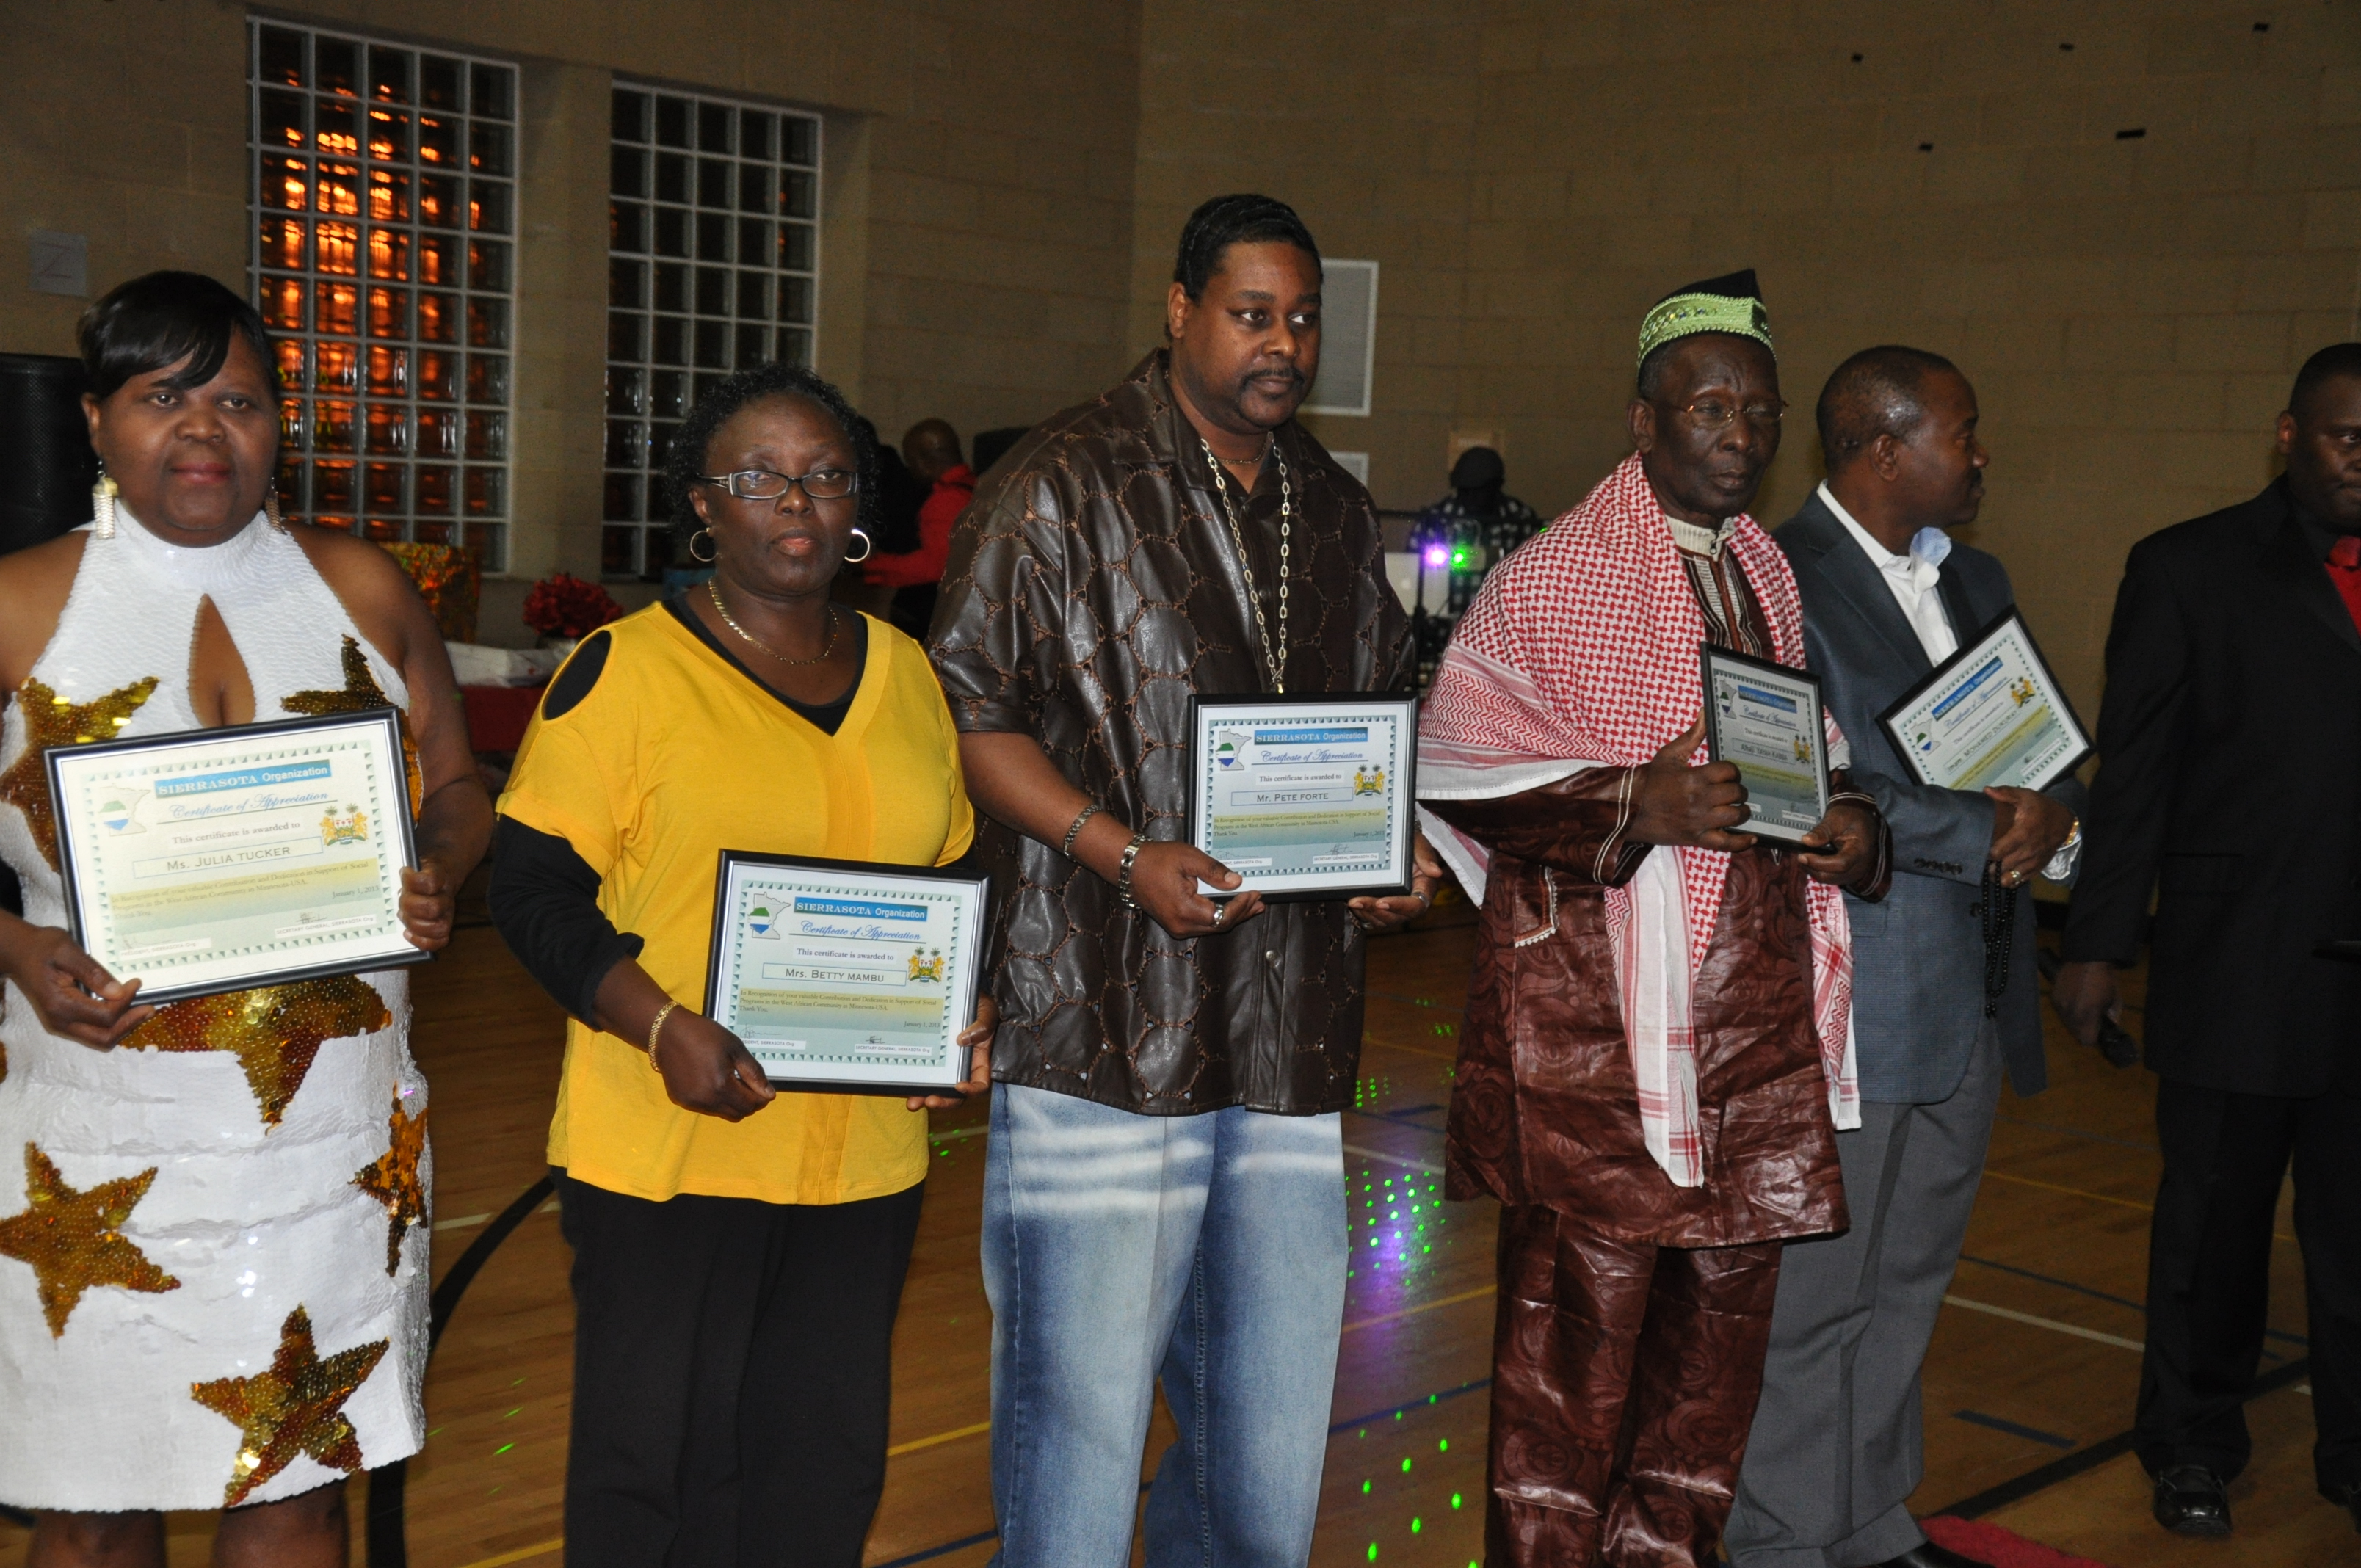 Five adults standing in a gym, each holding a certificate; three men and two women dressed in formal and traditional attire.